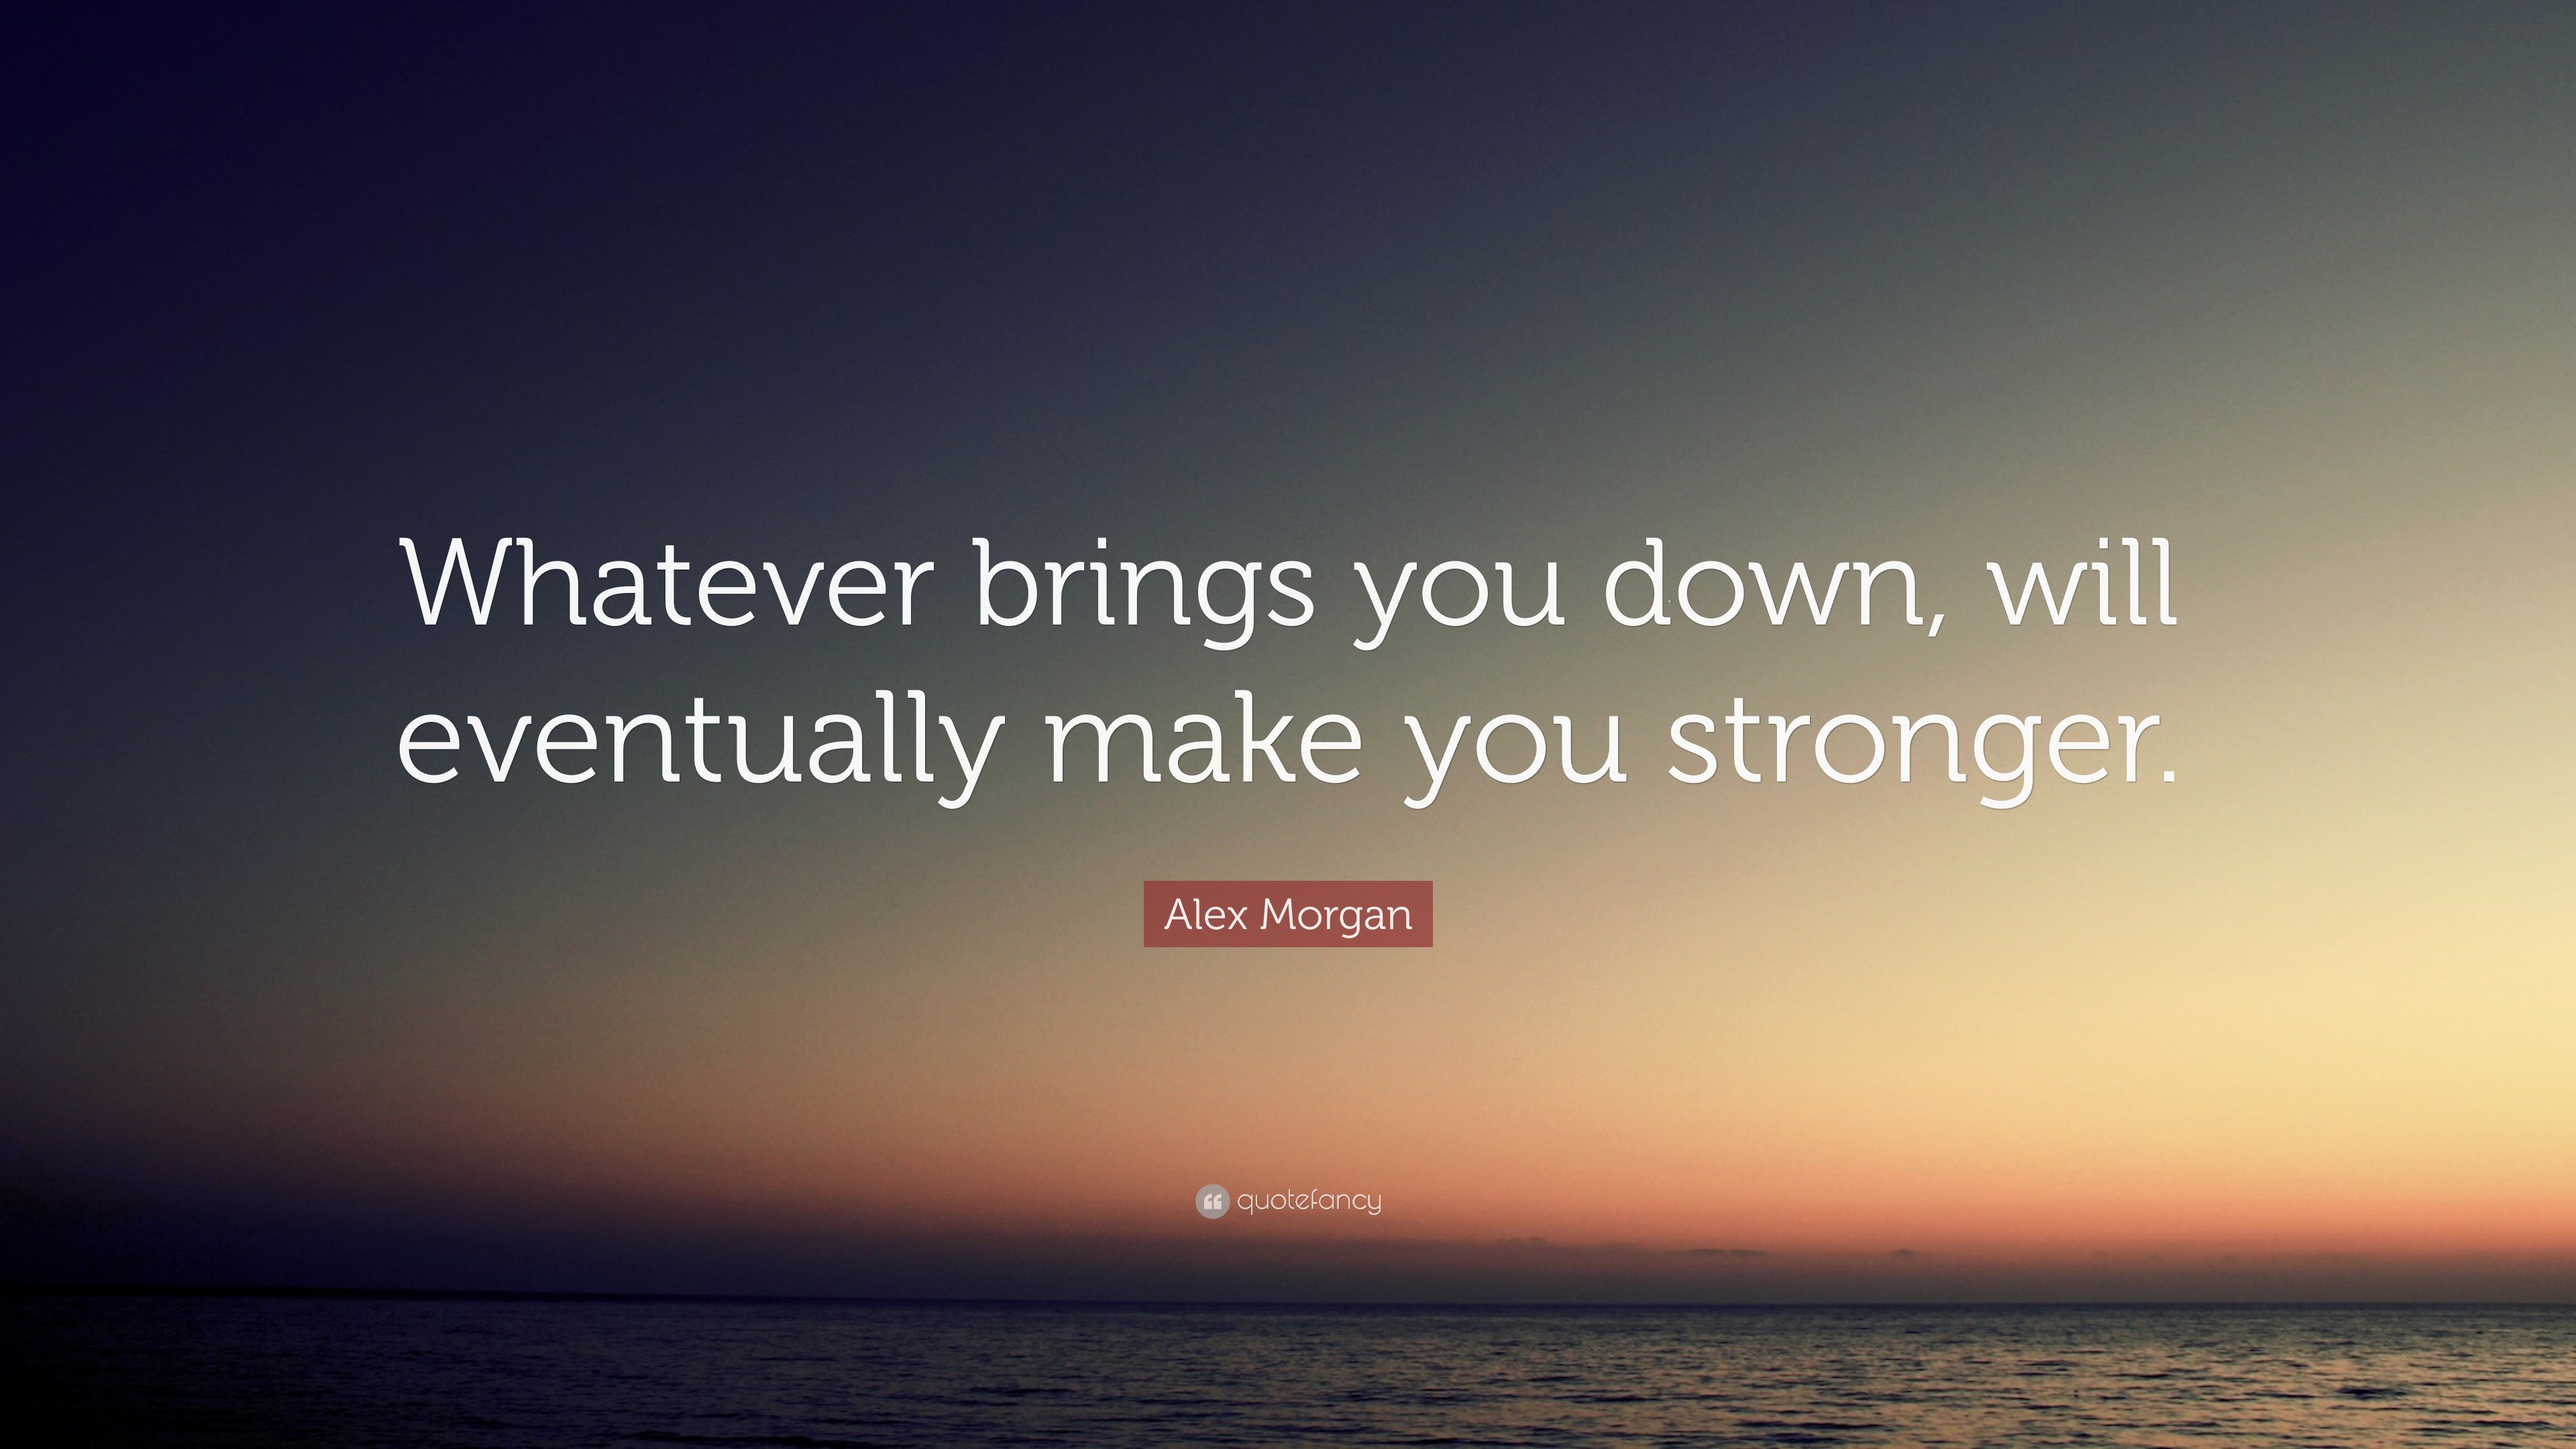 Alex Morgan Quote: “Whatever brings you down, will eventually make you ...